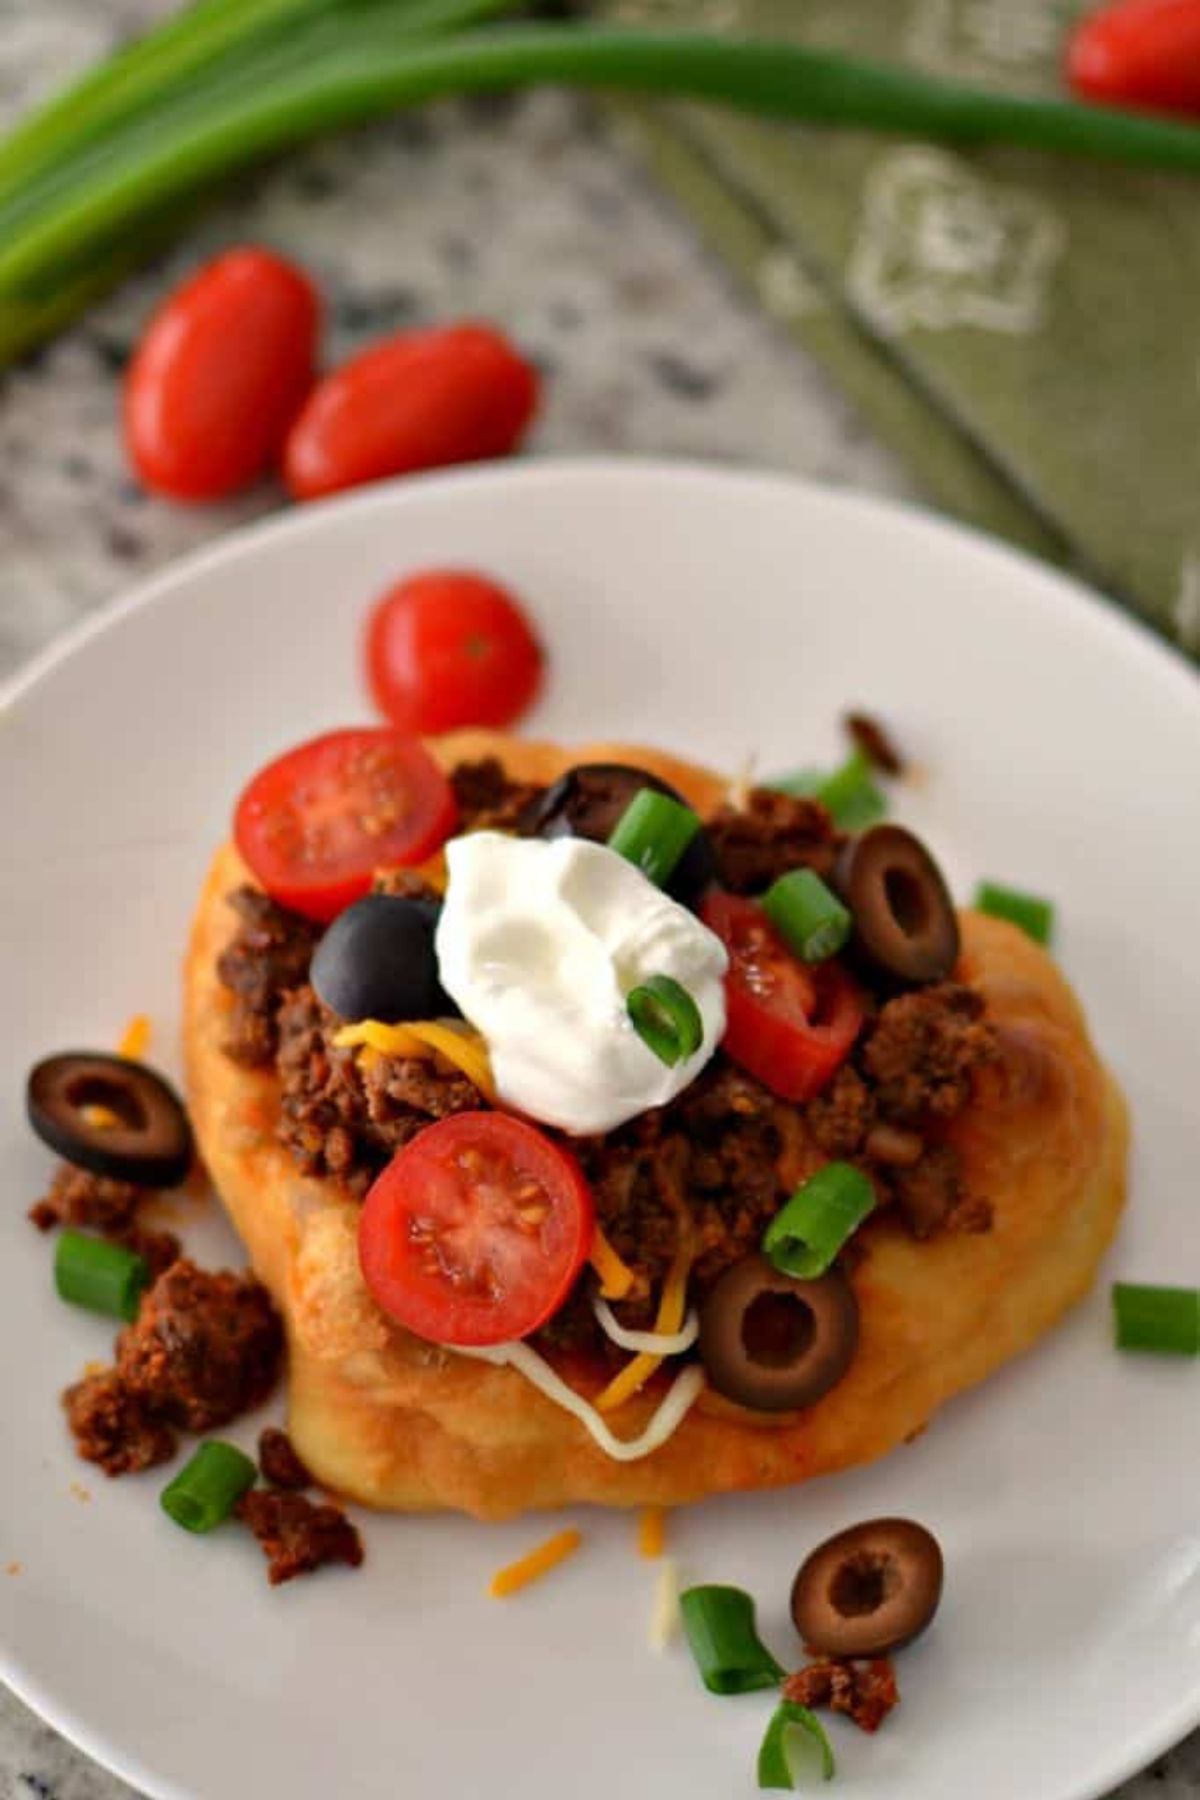 Fry bread made into a Navajo taco with sour cream and green onion.